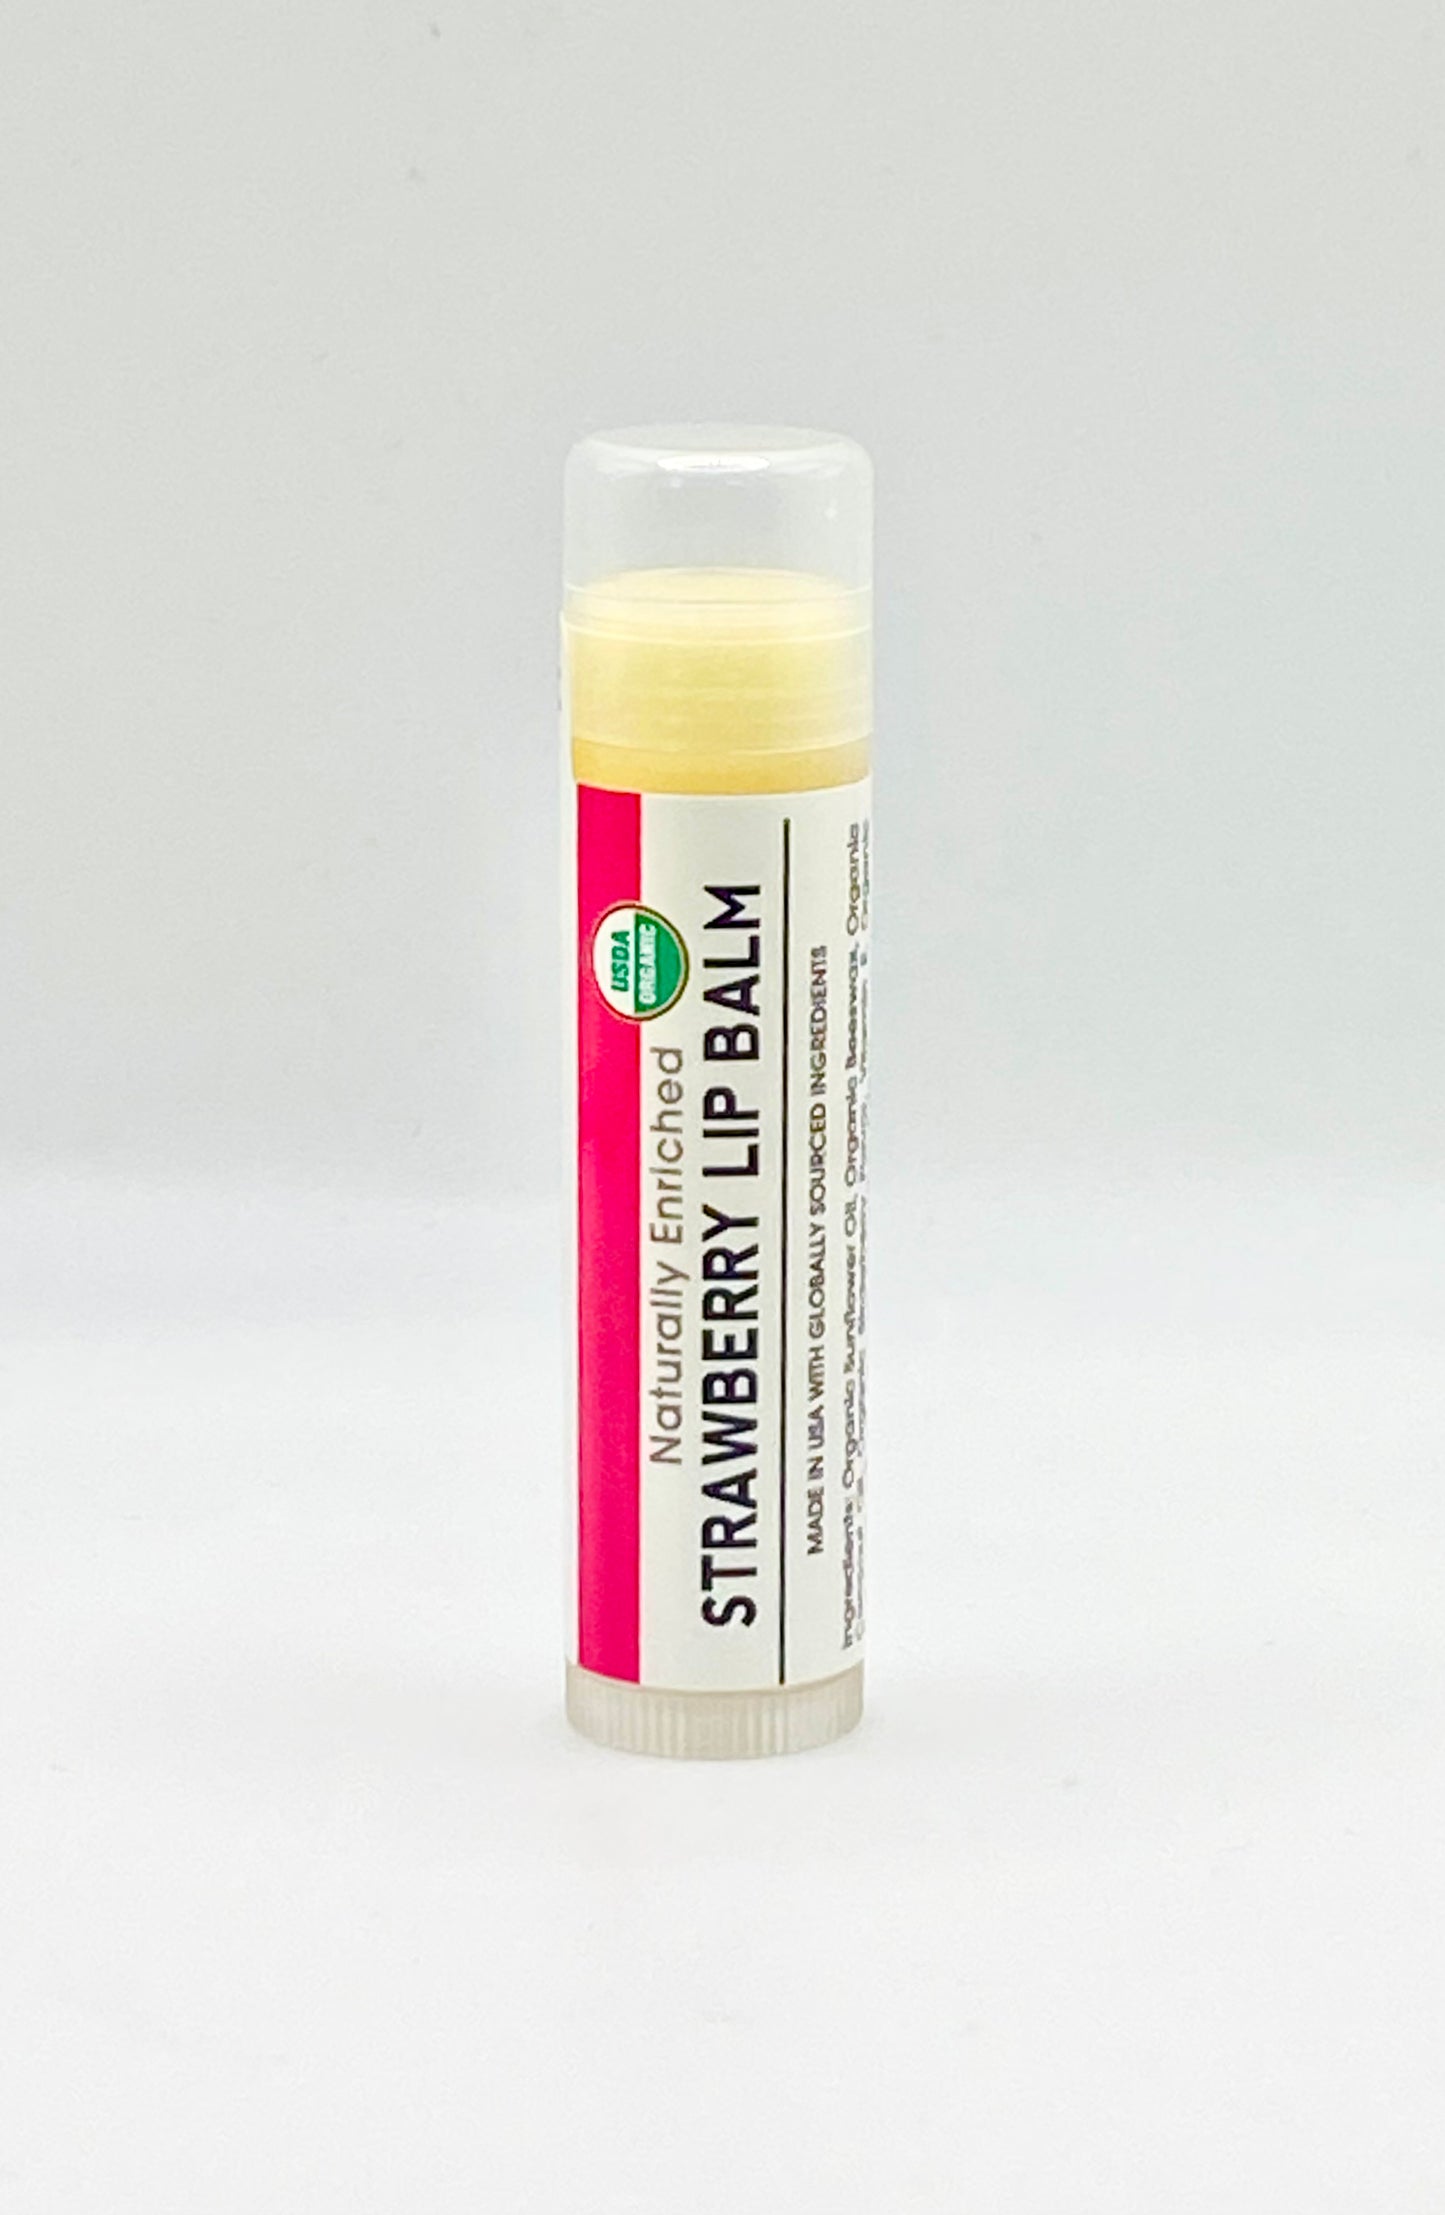 Strawberry Lip Balm, Gentle + Soothing, Certified Organic